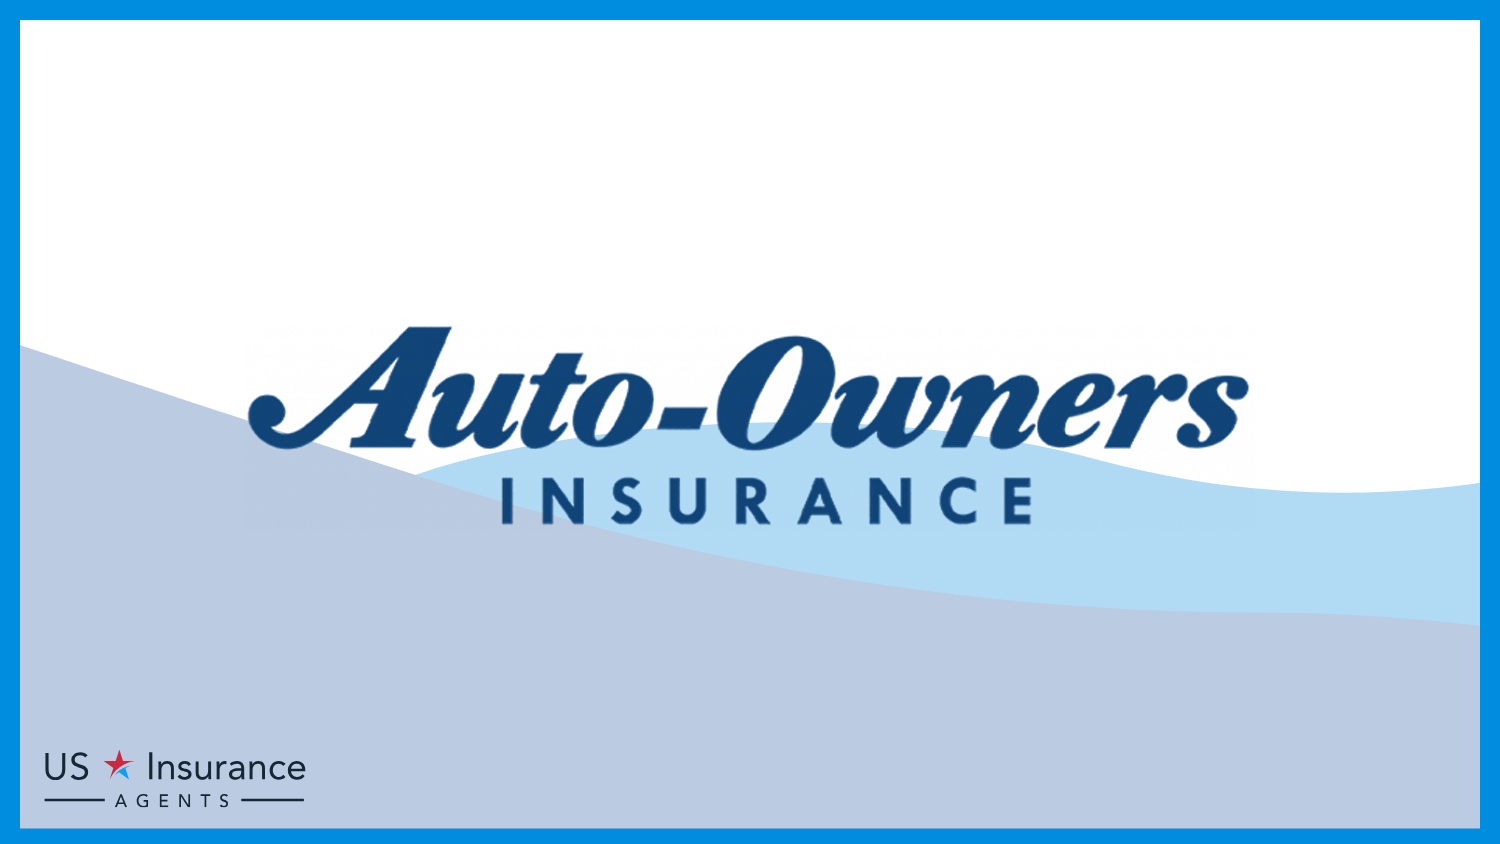 Auto-Owners: Best Business Insurance for Commercial Building Painters